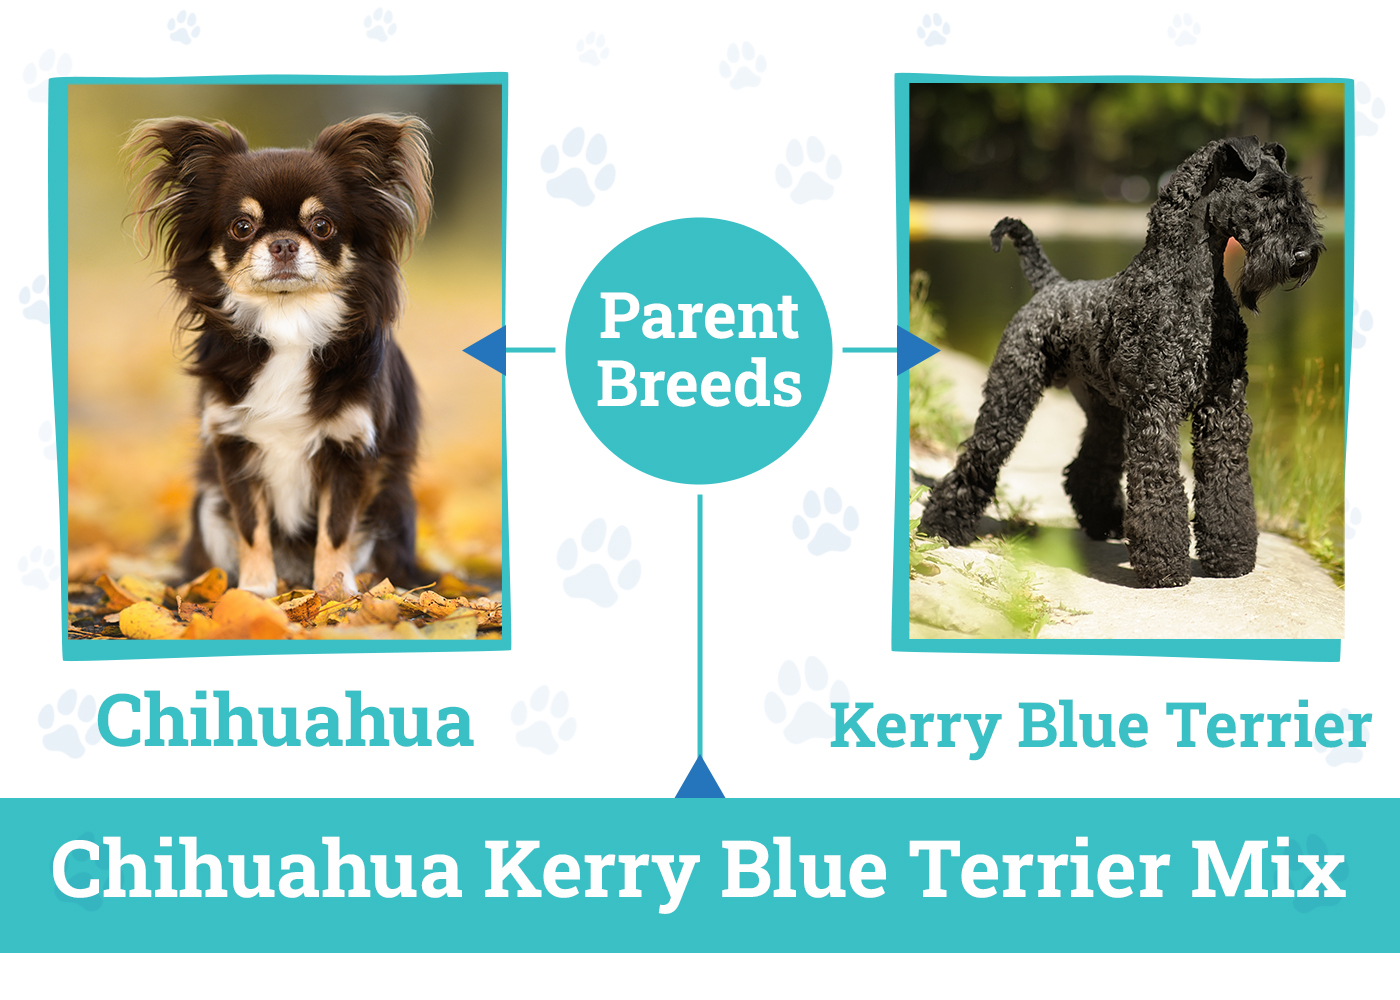 Parent Breeds of the Chihuahua Kerry Blue Terrier Mix